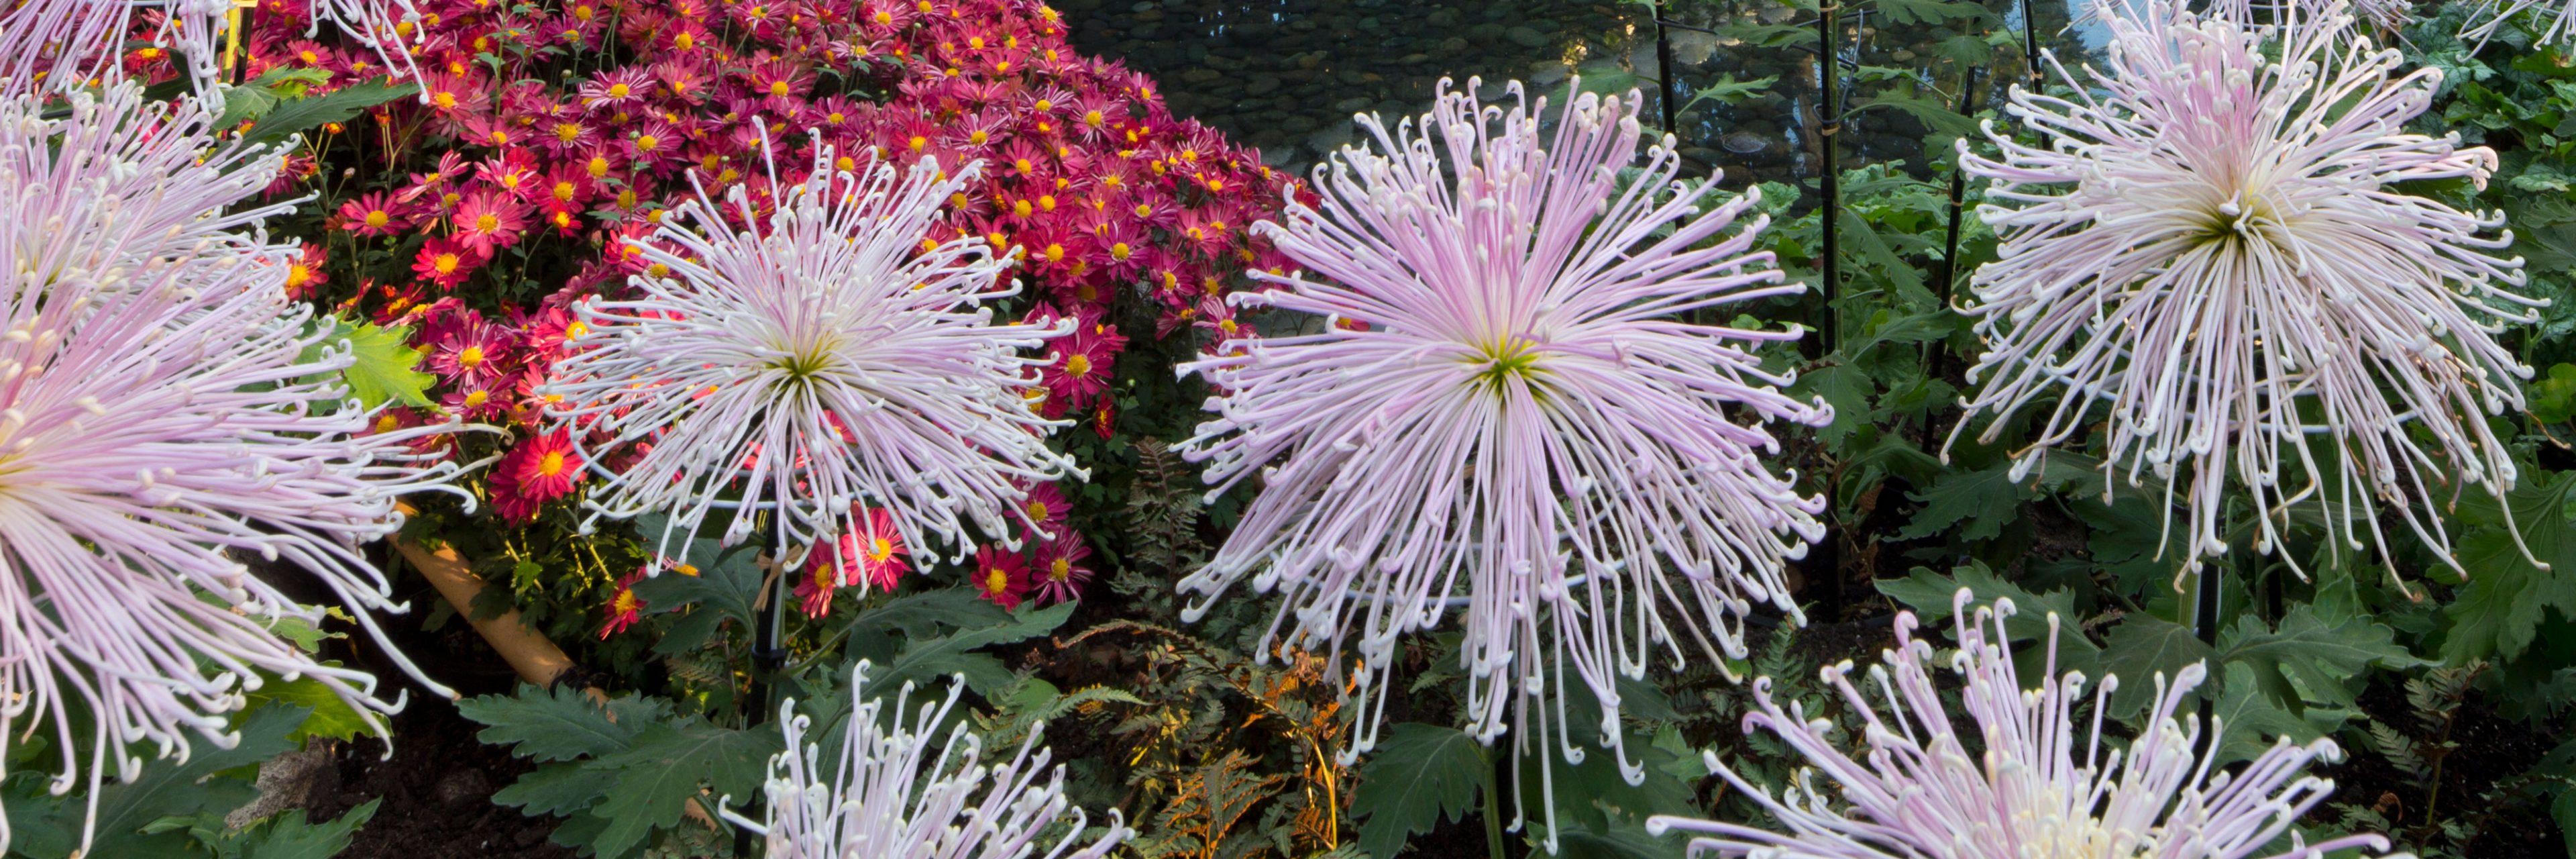 Two pink spider chrysanthemums with long, thin petals